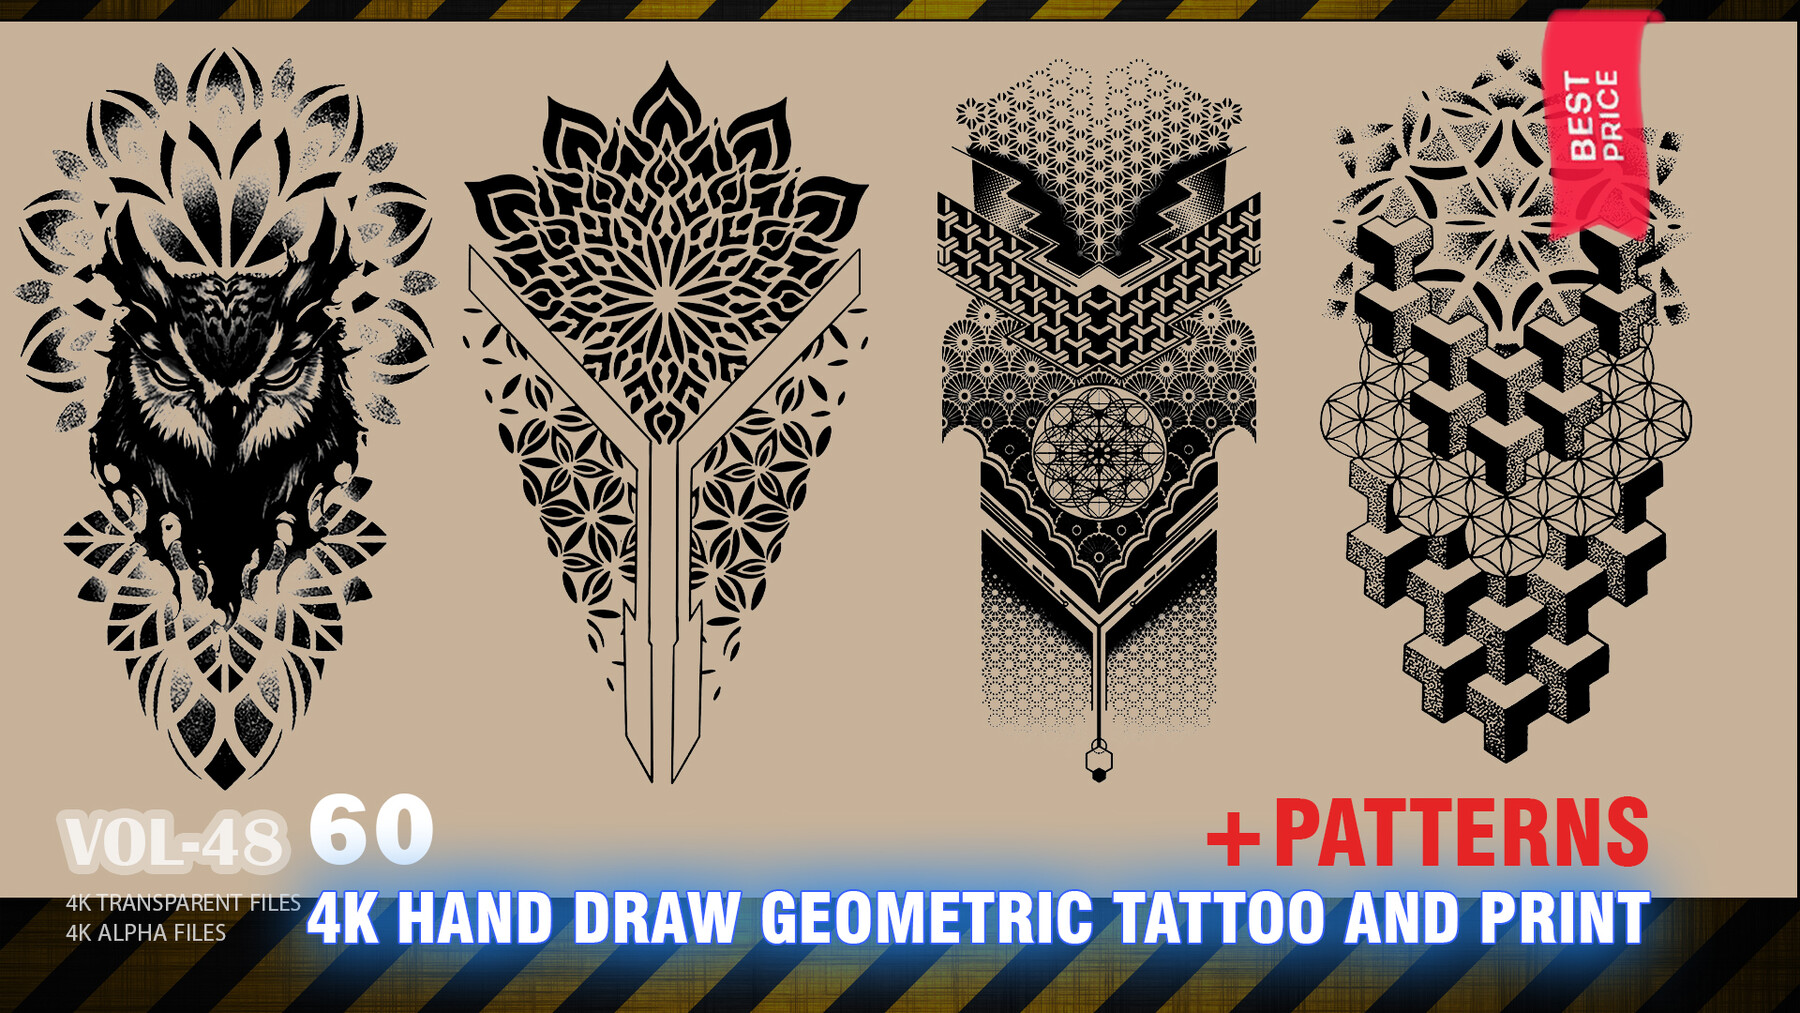 40 Of The Best Geometric Tattoos For Men in 2023 | FashionBeans